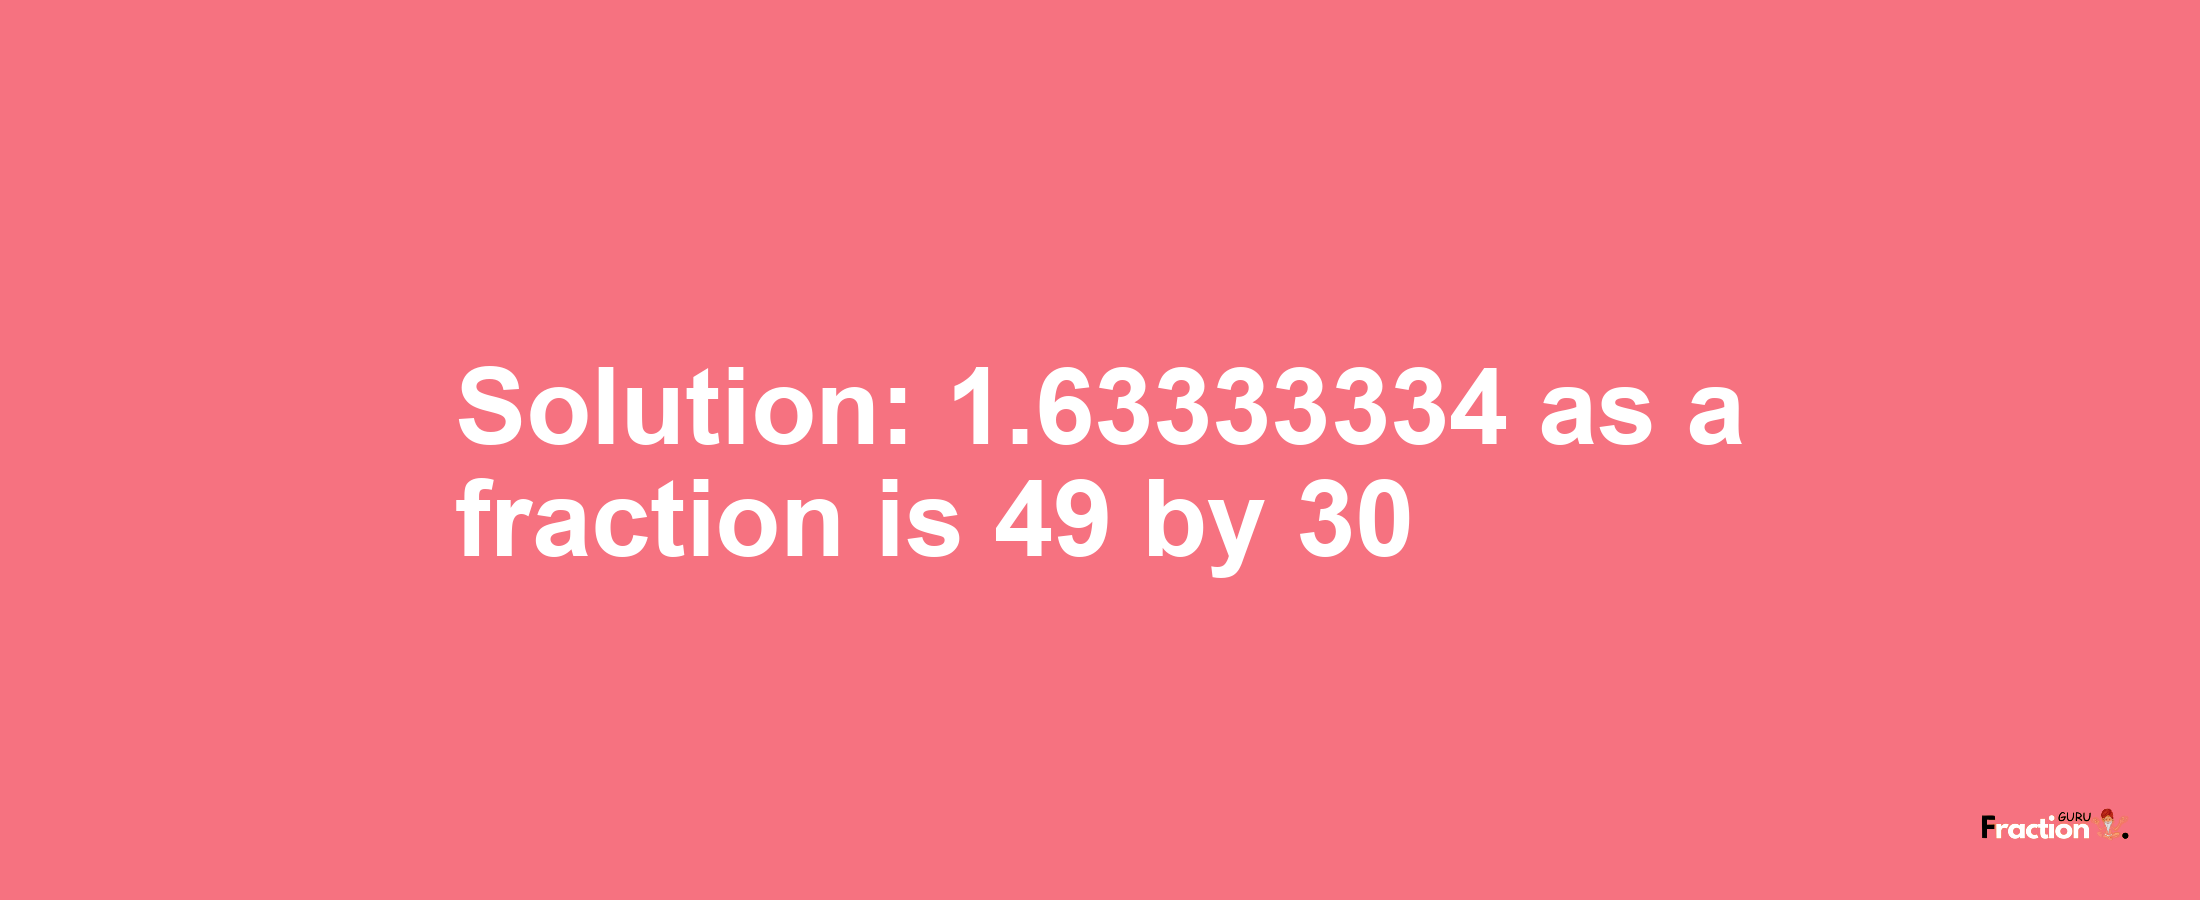 Solution:1.63333334 as a fraction is 49/30